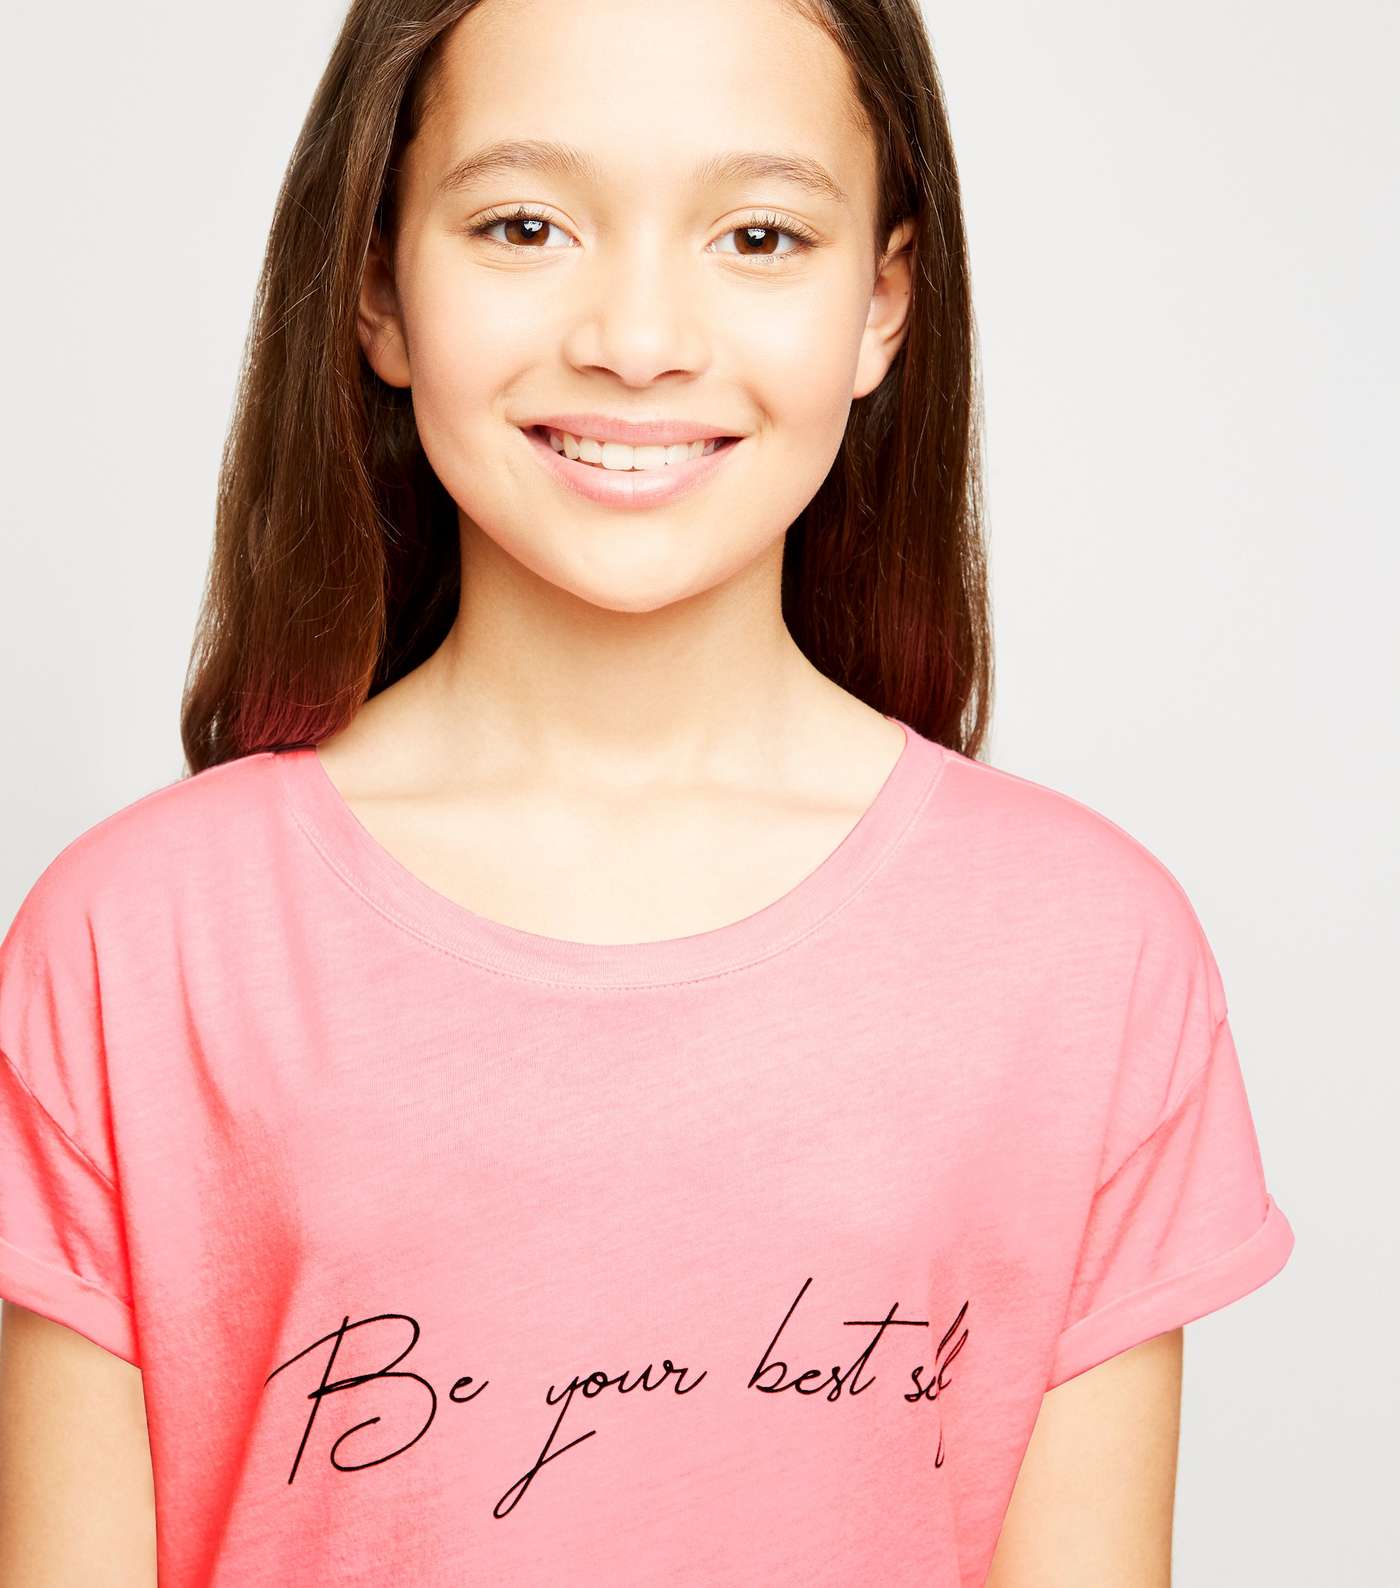 Girls Bright Pink Be Your Best Self Slogan T-Shirt Image 3